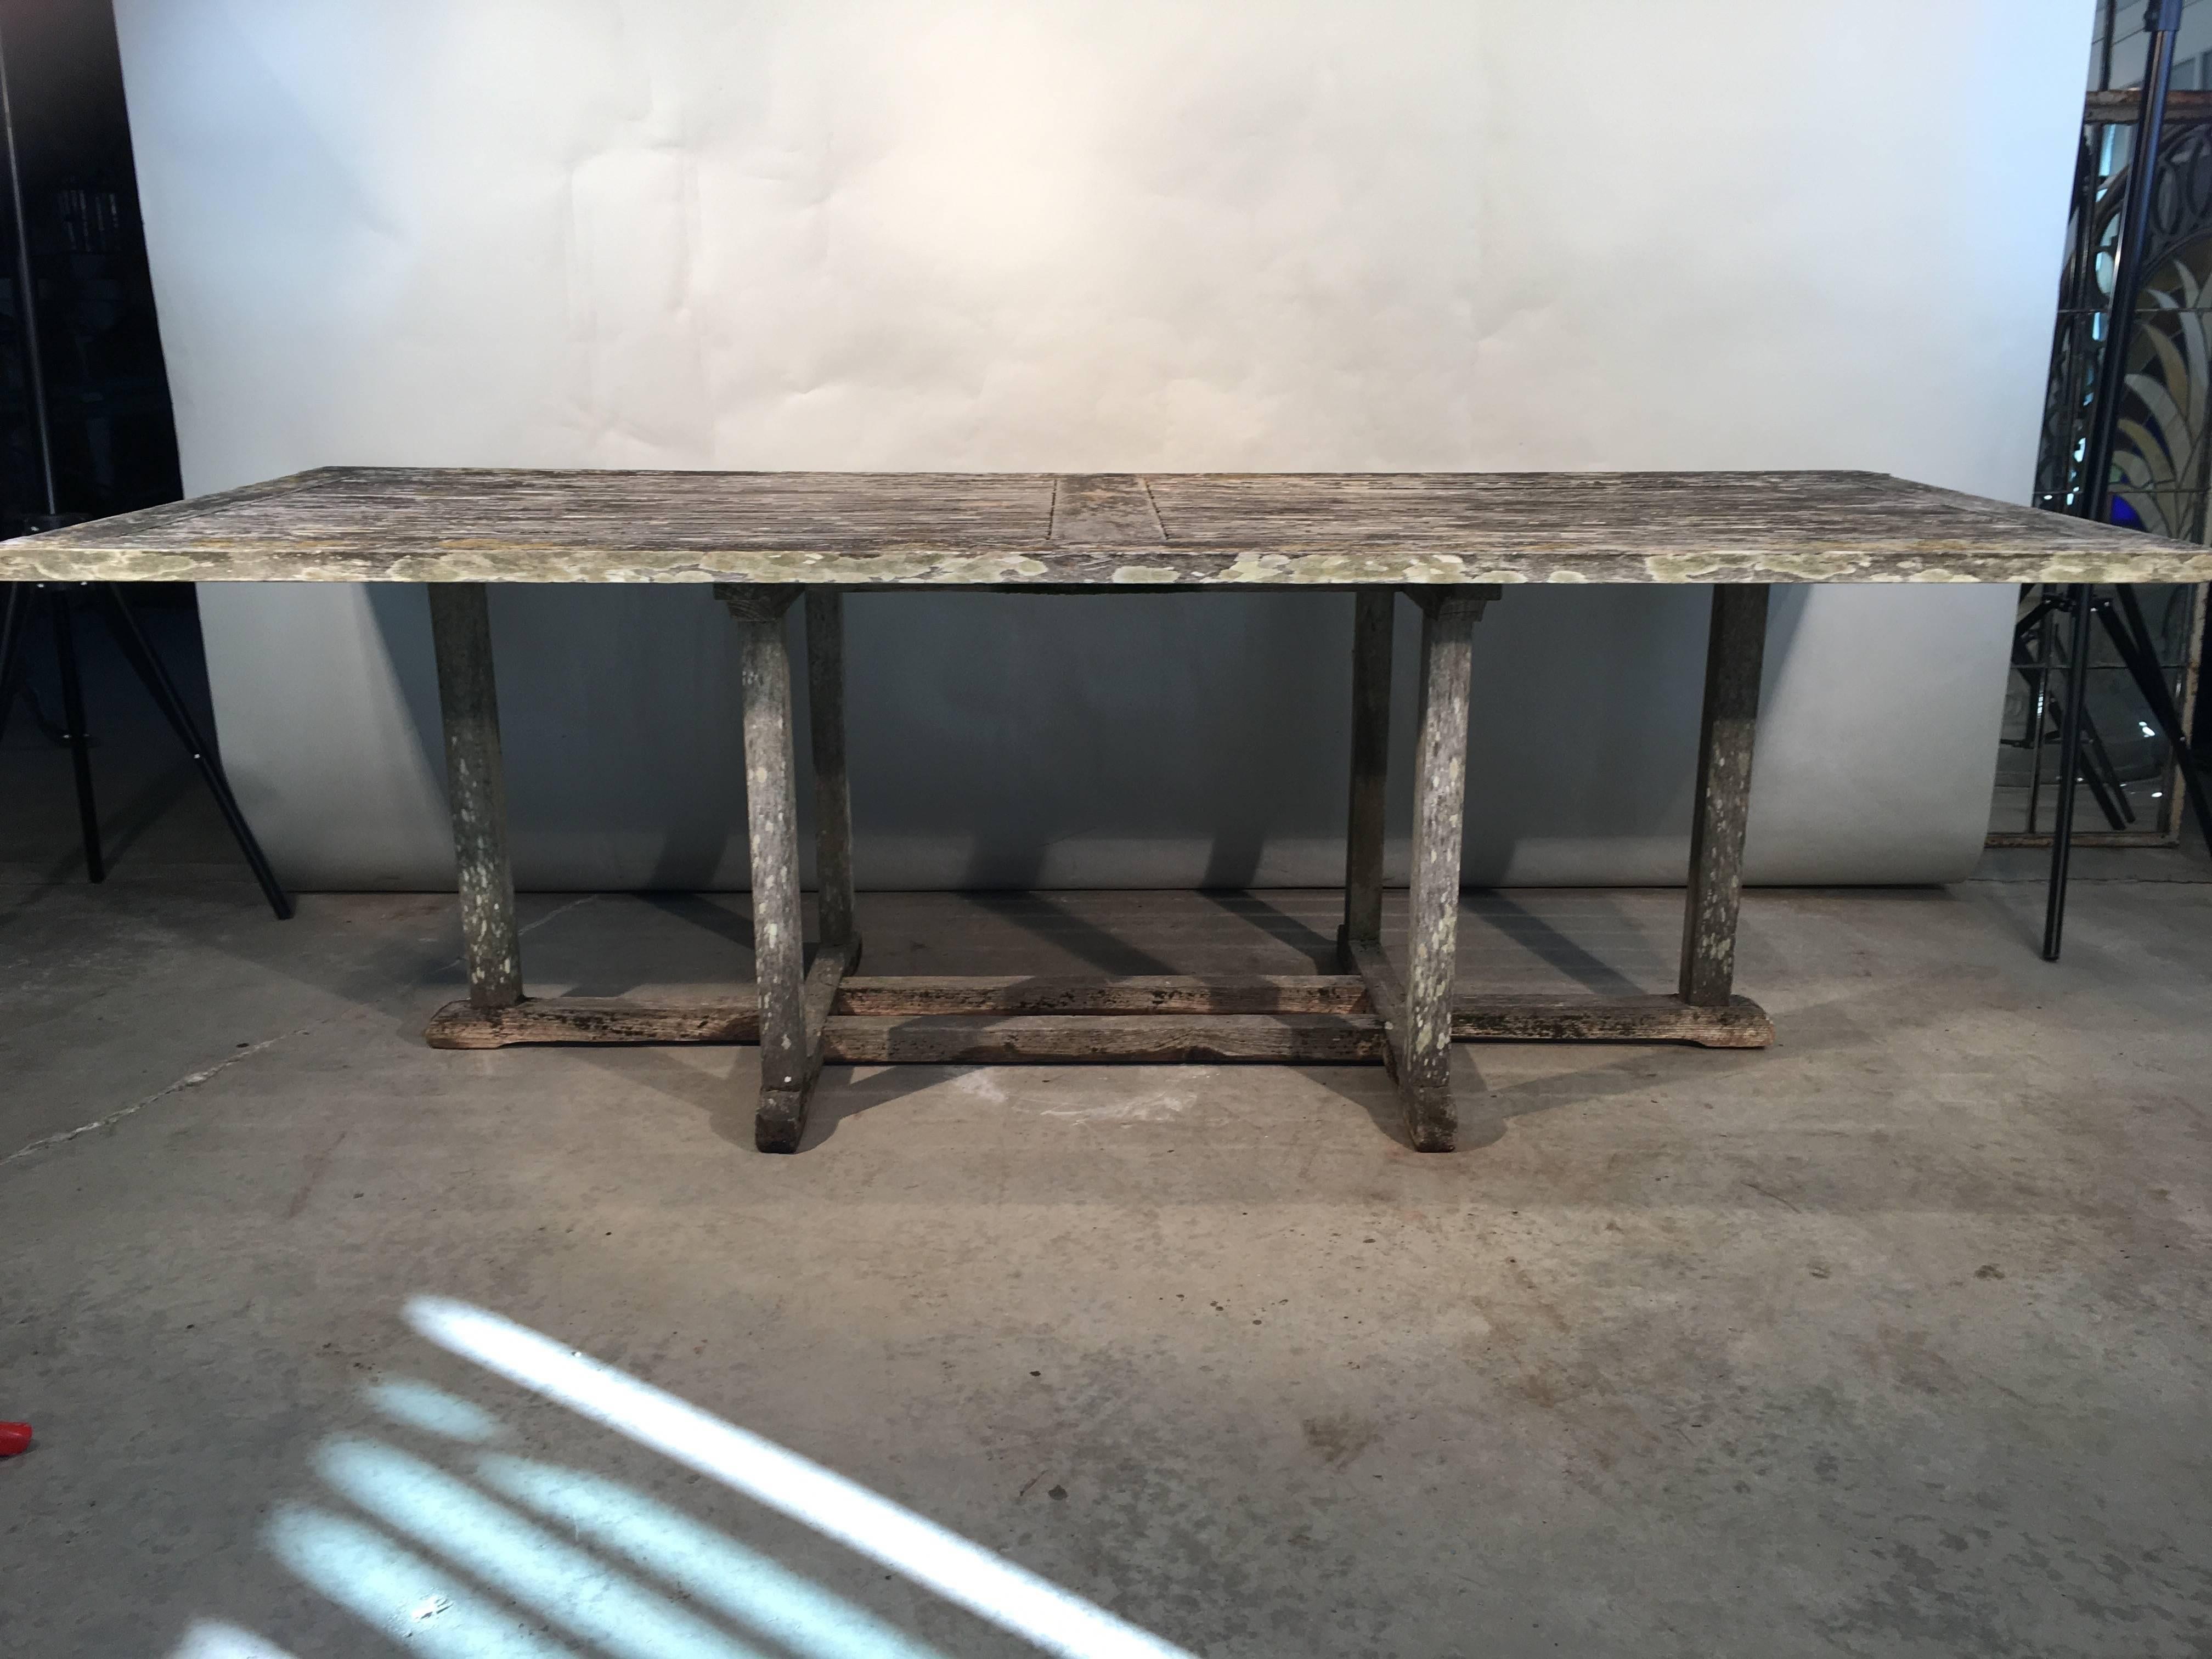 This large rectangular teak table will seat 8-10, and it features a lovely weathered surface that is clean enough to dine on but does not disappoint patina-wise. It is very solid with tight joints and has no wobble to it. Place it in your garden or